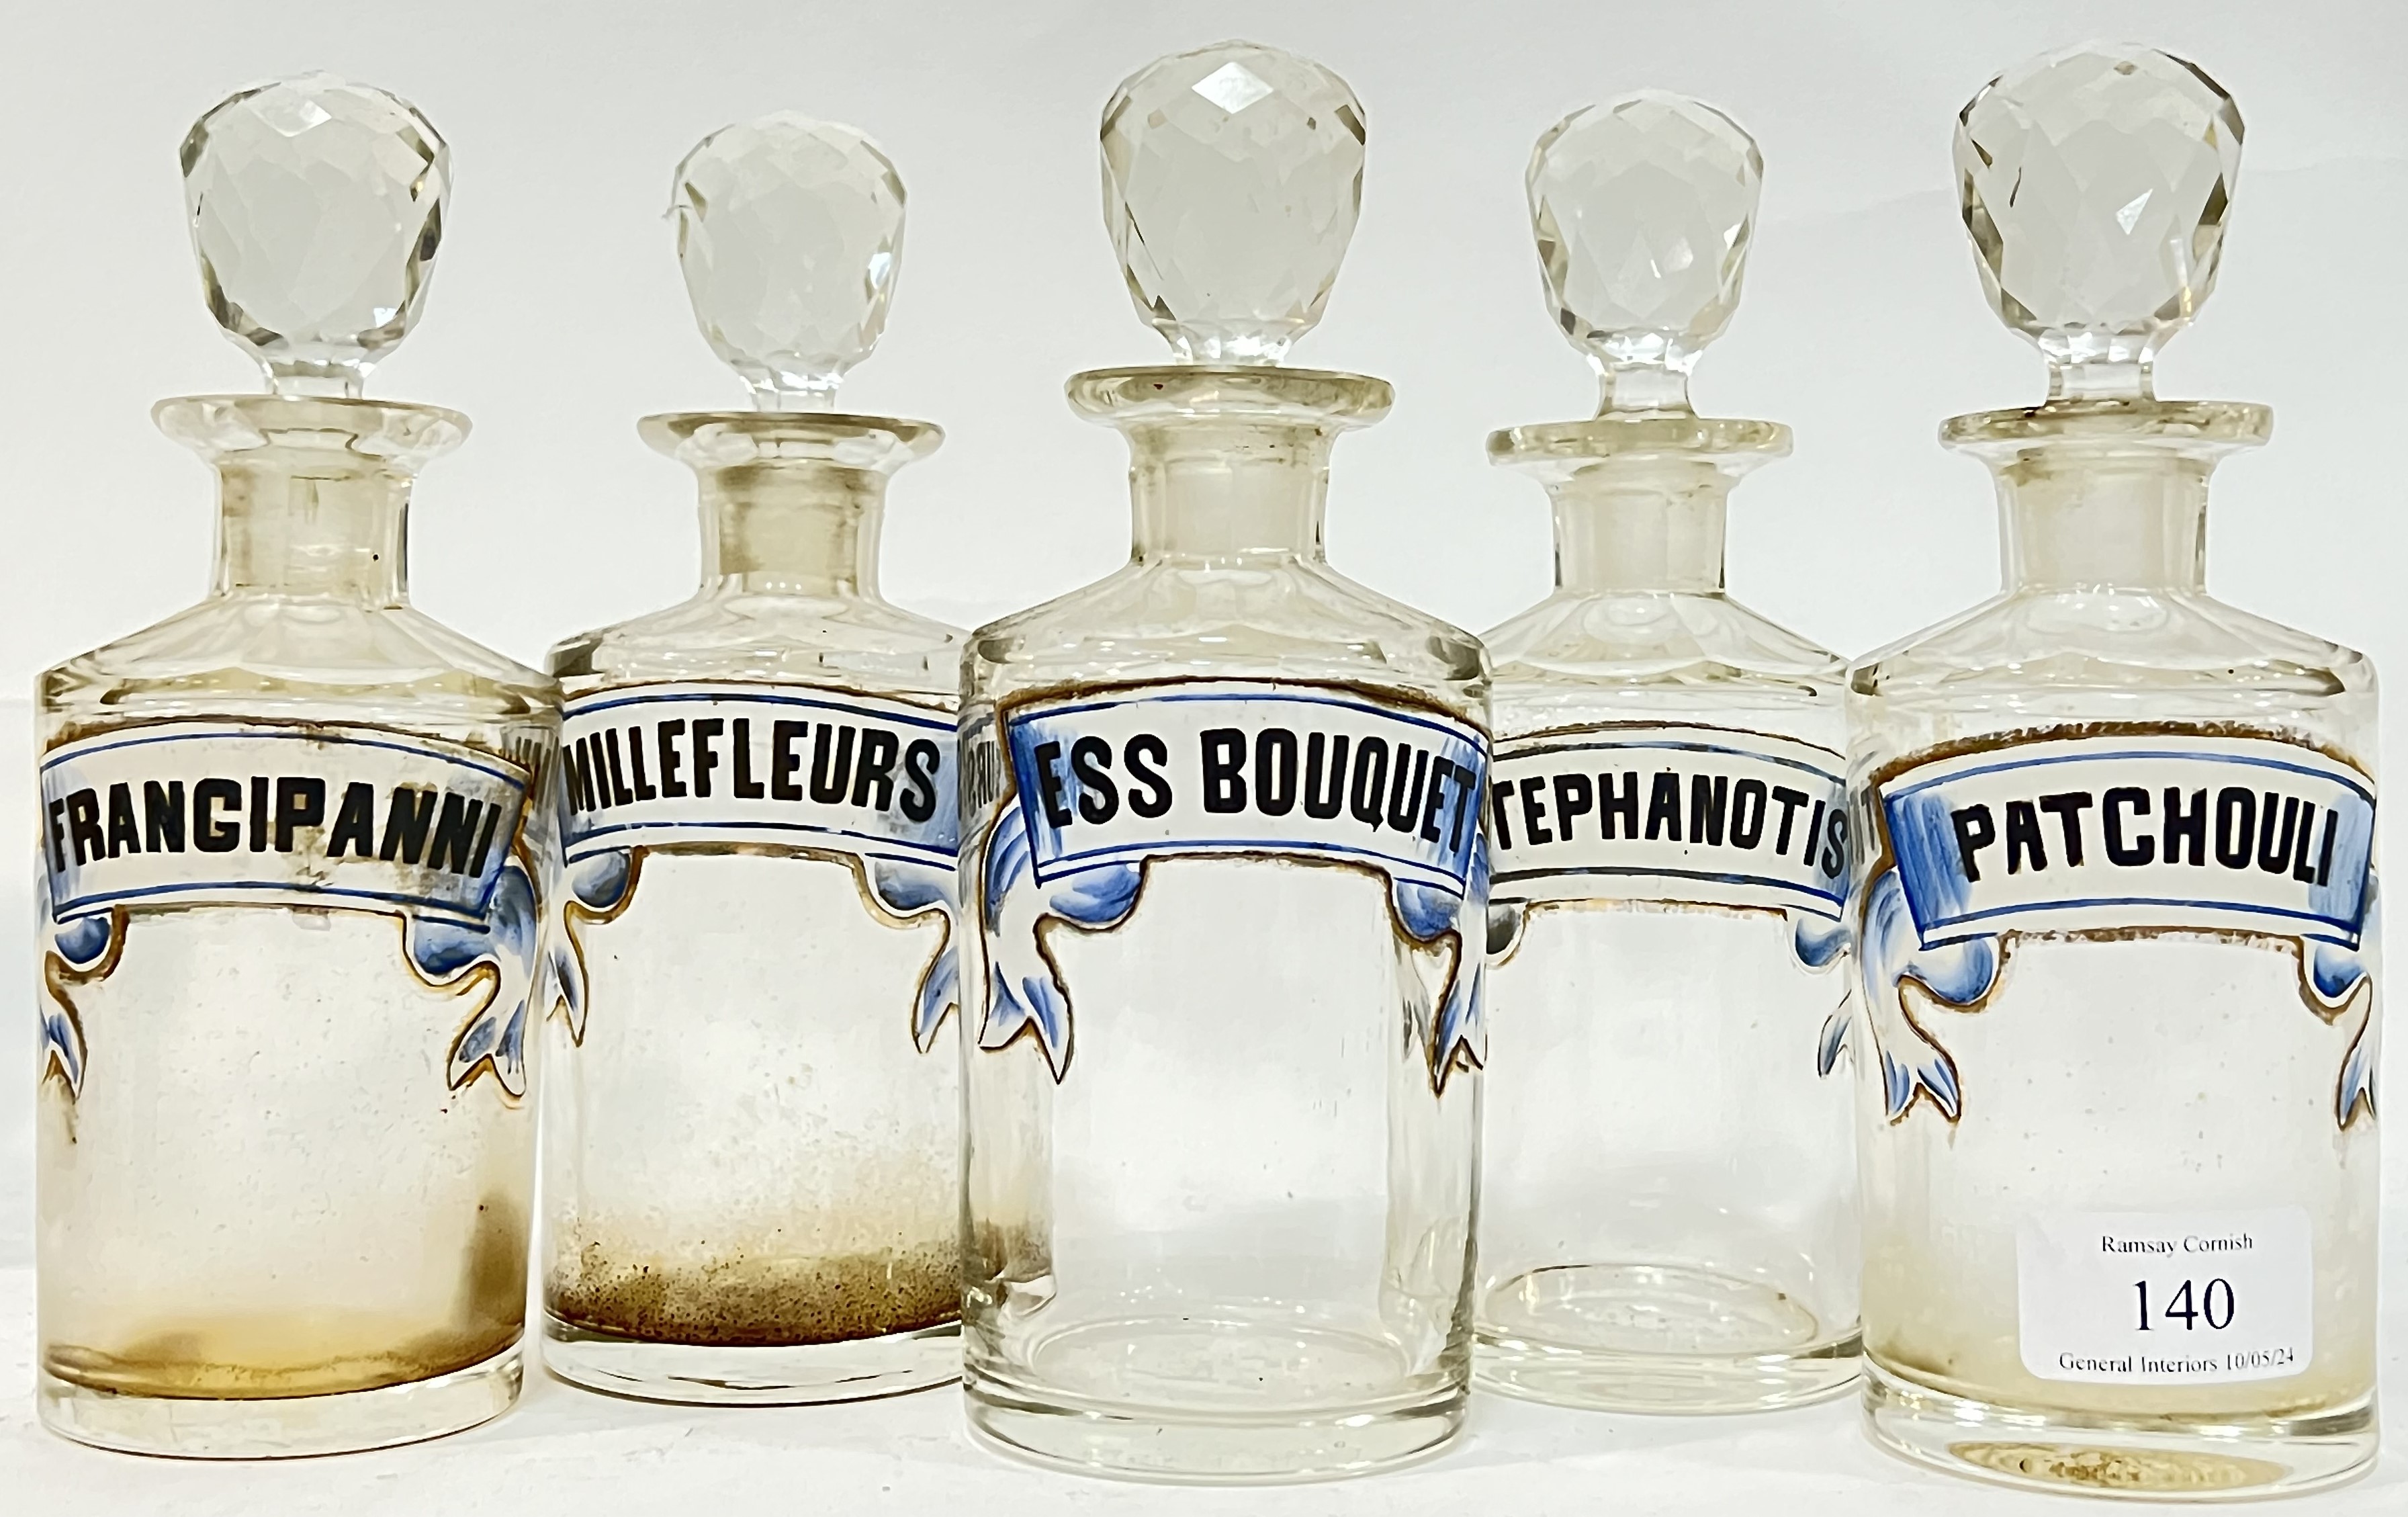 Five unusual faceted glass chemist/apothecary jars/bottles with enameled labels (possibly